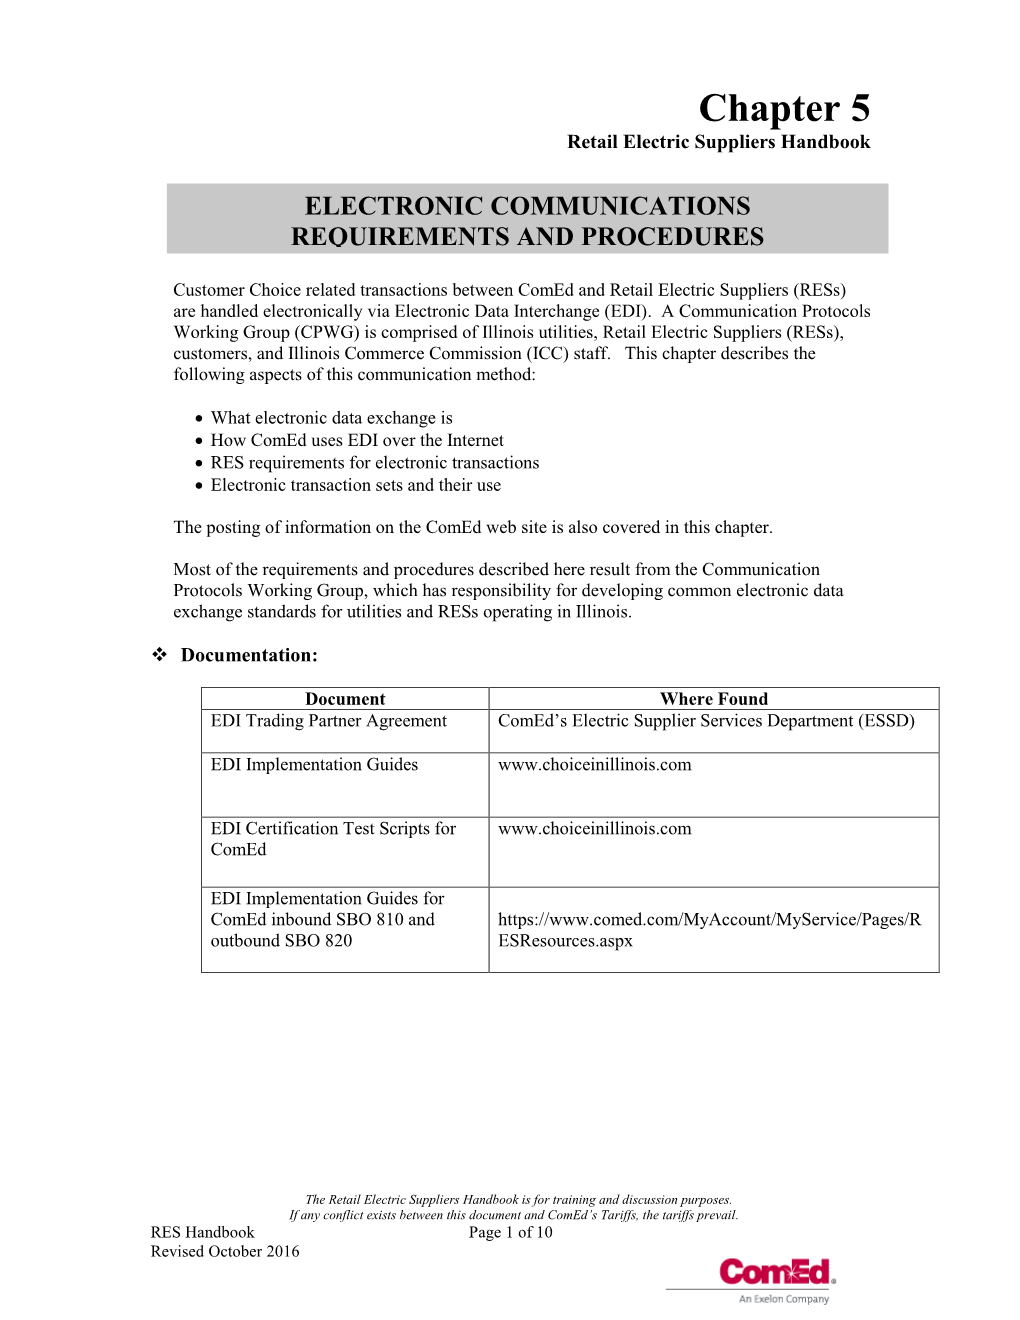 Electronic Requirements